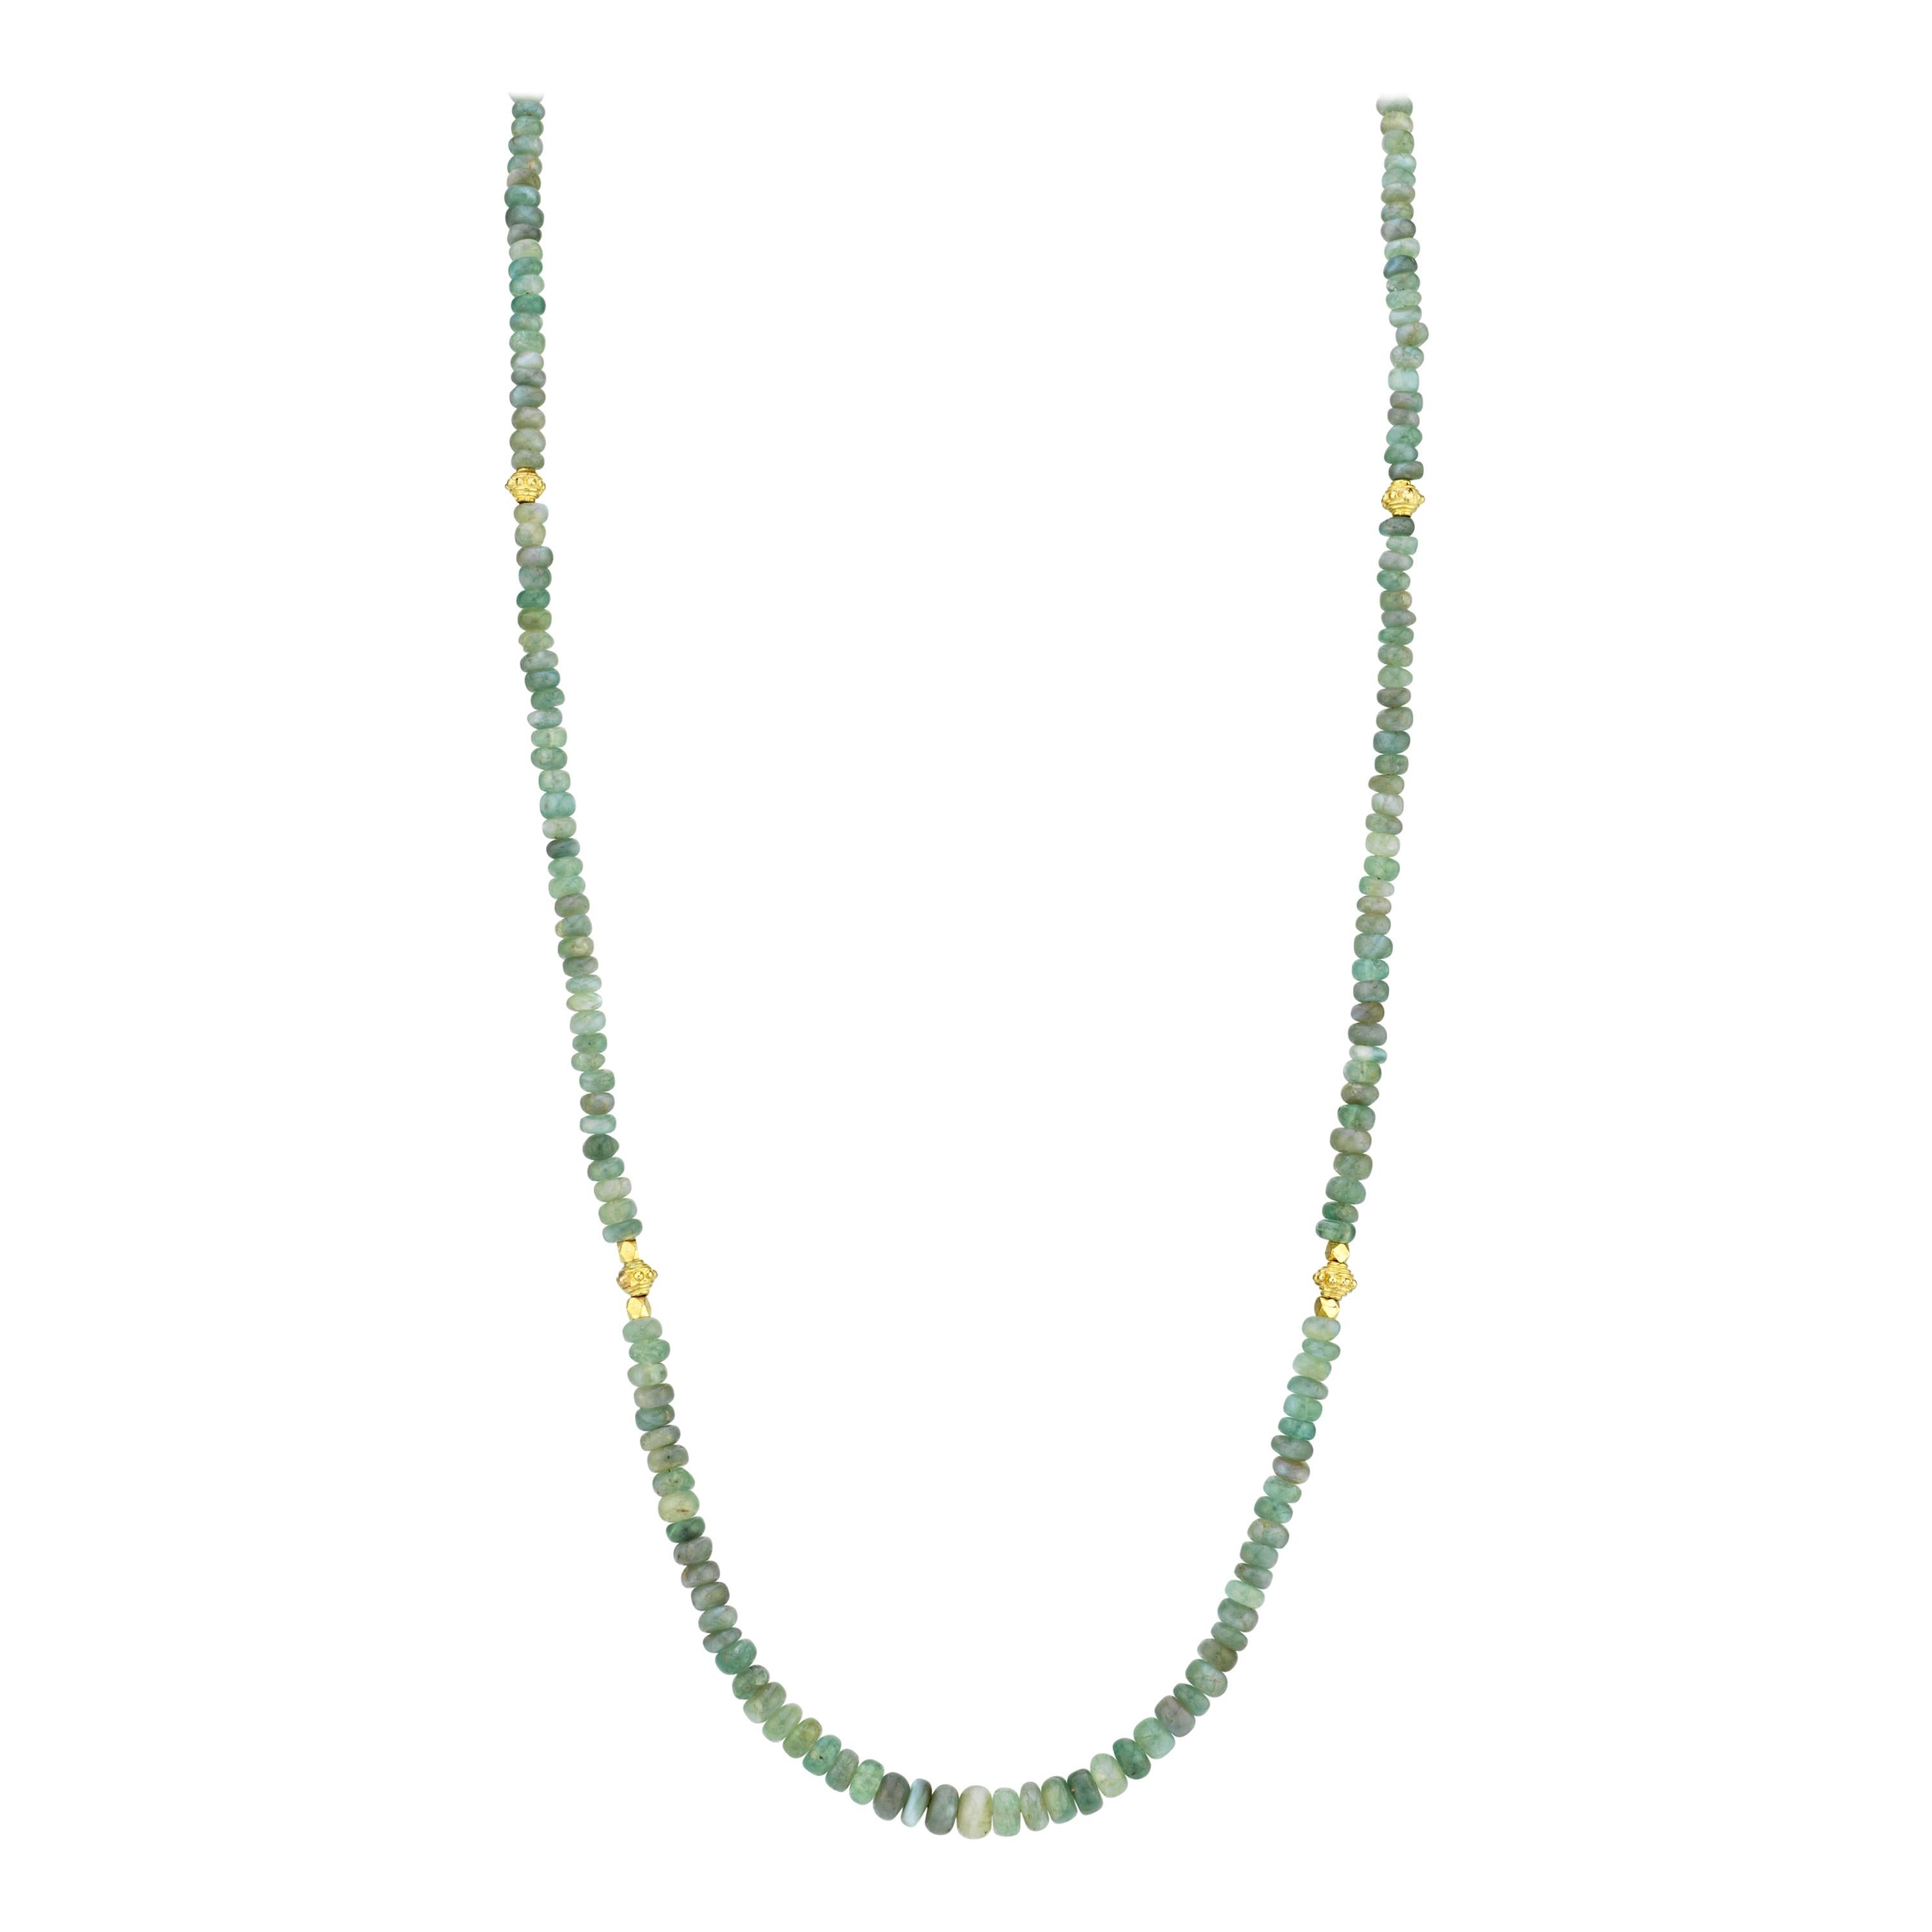 Alexandrite Chrysoberyl Rondelle Bead Necklace, Yellow Gold Accents, 18 Inches